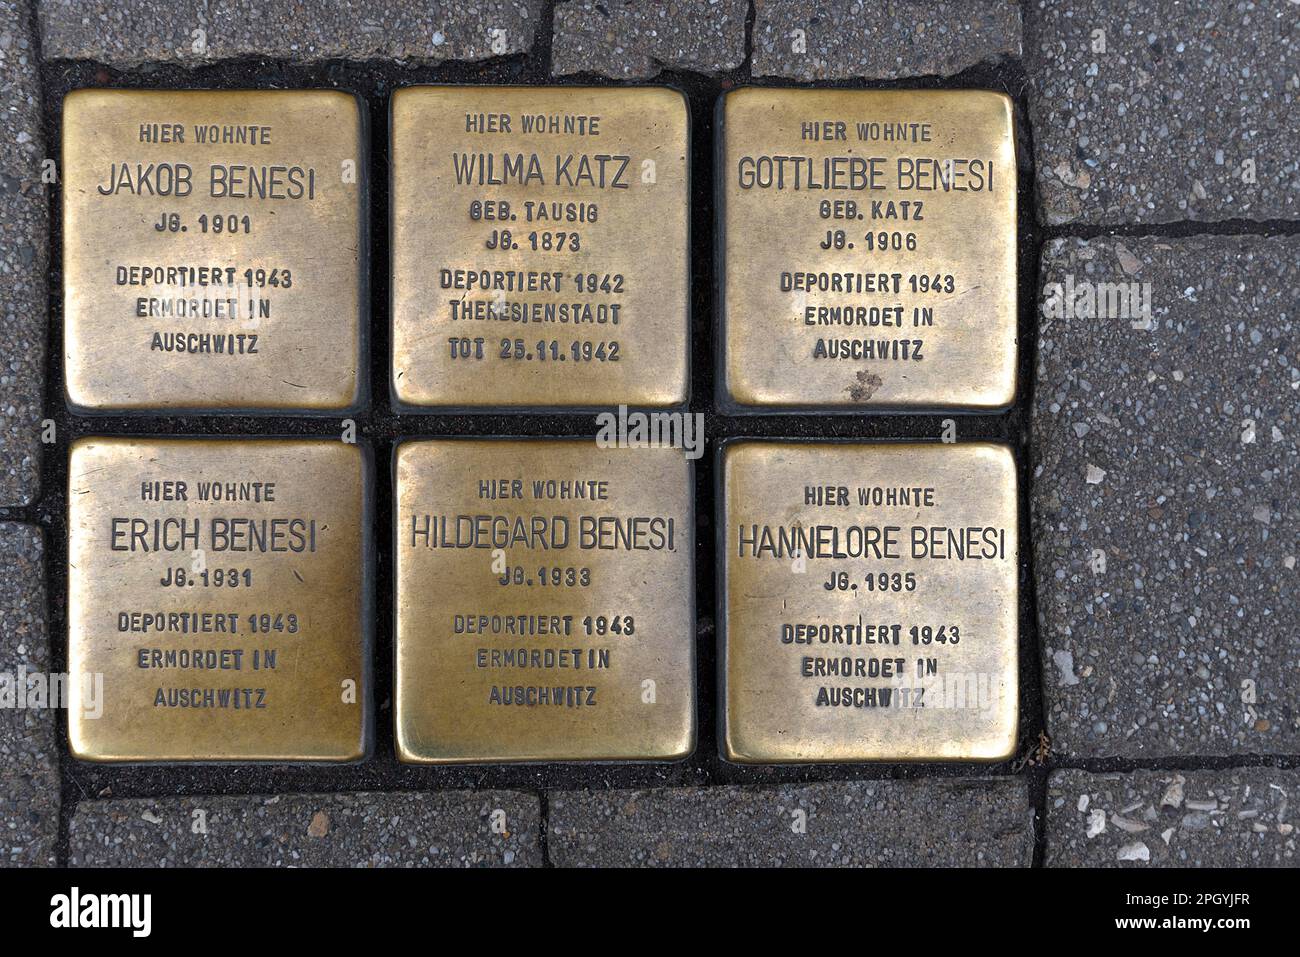 Stolpersteine, copper memorial slabs of murdered Jewish fellow citizens during the Nazi era, Erlangen, Middle Franconia, Bavaria, Germany Stock Photo